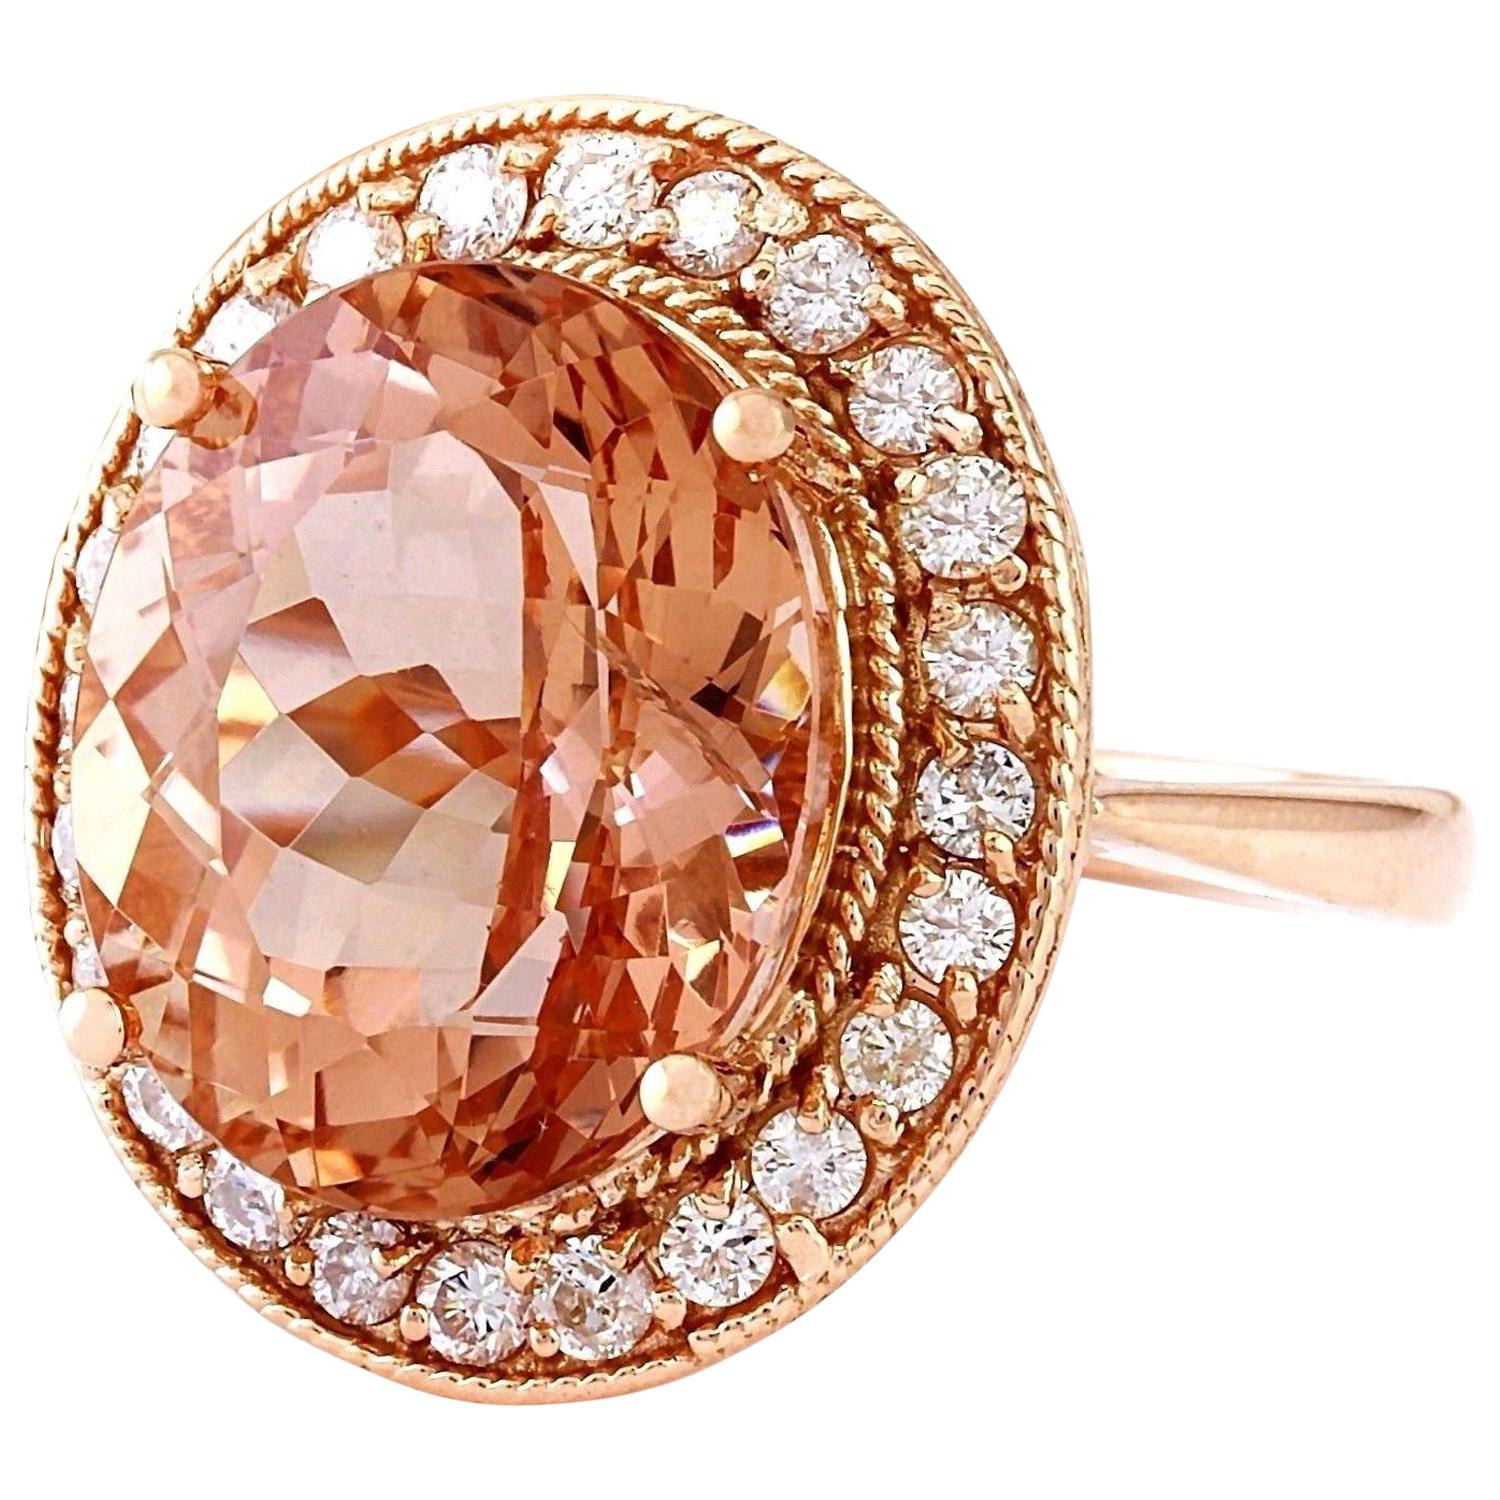 10.90 Carat Natural Morganite 14K Solid Rose Gold Diamond Ring
 Item Type: Ring
 Item Style: Cocktail
 Material: 14K Rose Gold
 Mainstone: Morganite
 Stone Color: Peach
 Stone Weight: 10.20 Carat
 Stone Shape: Oval
 Stone Quantity: 1
 Stone